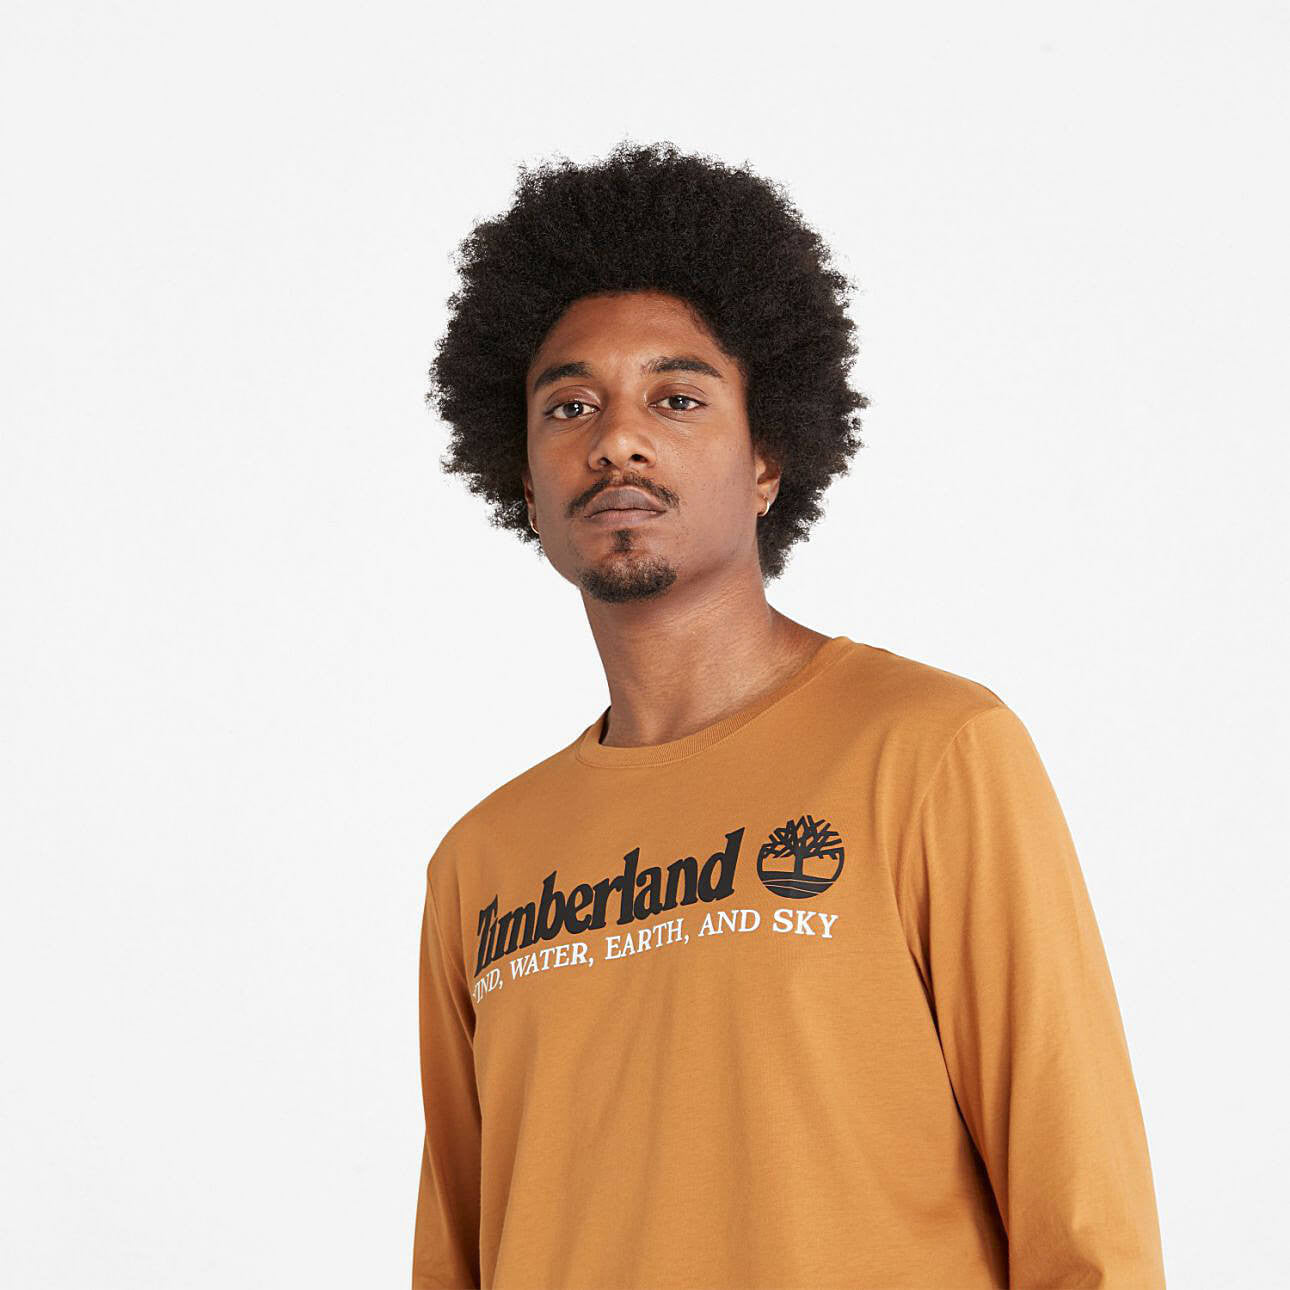 Timberland WWES LS Tee Wheat Boot